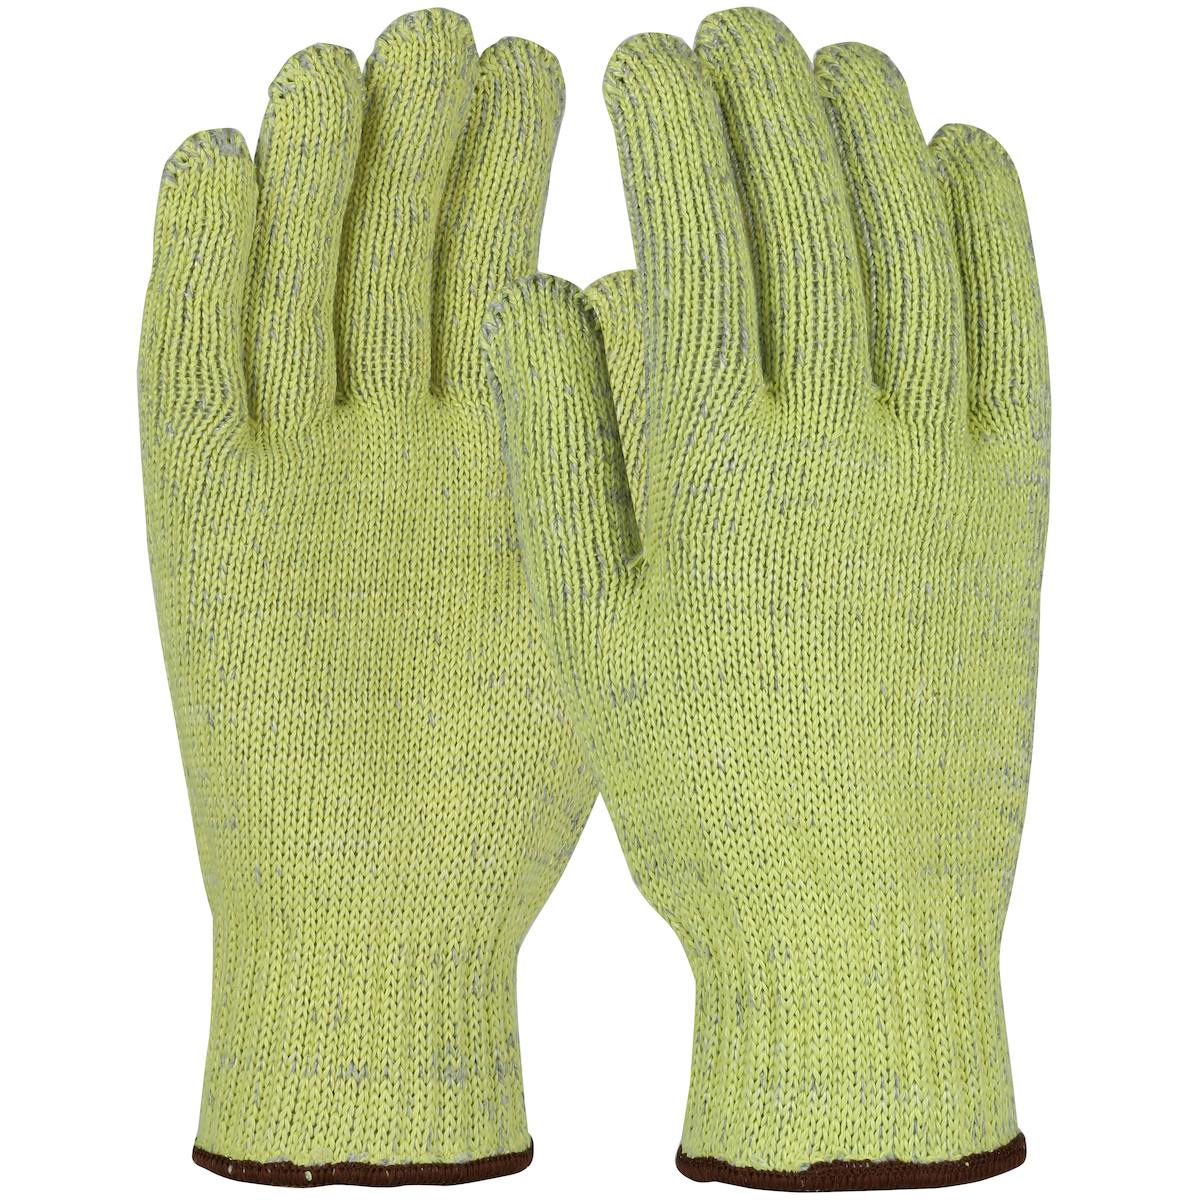 Kut Gard® Seamless Knit ATA® / Aramid Blended Glove with Cotton/Polyester Plating - Heavy Weight (MATA502)